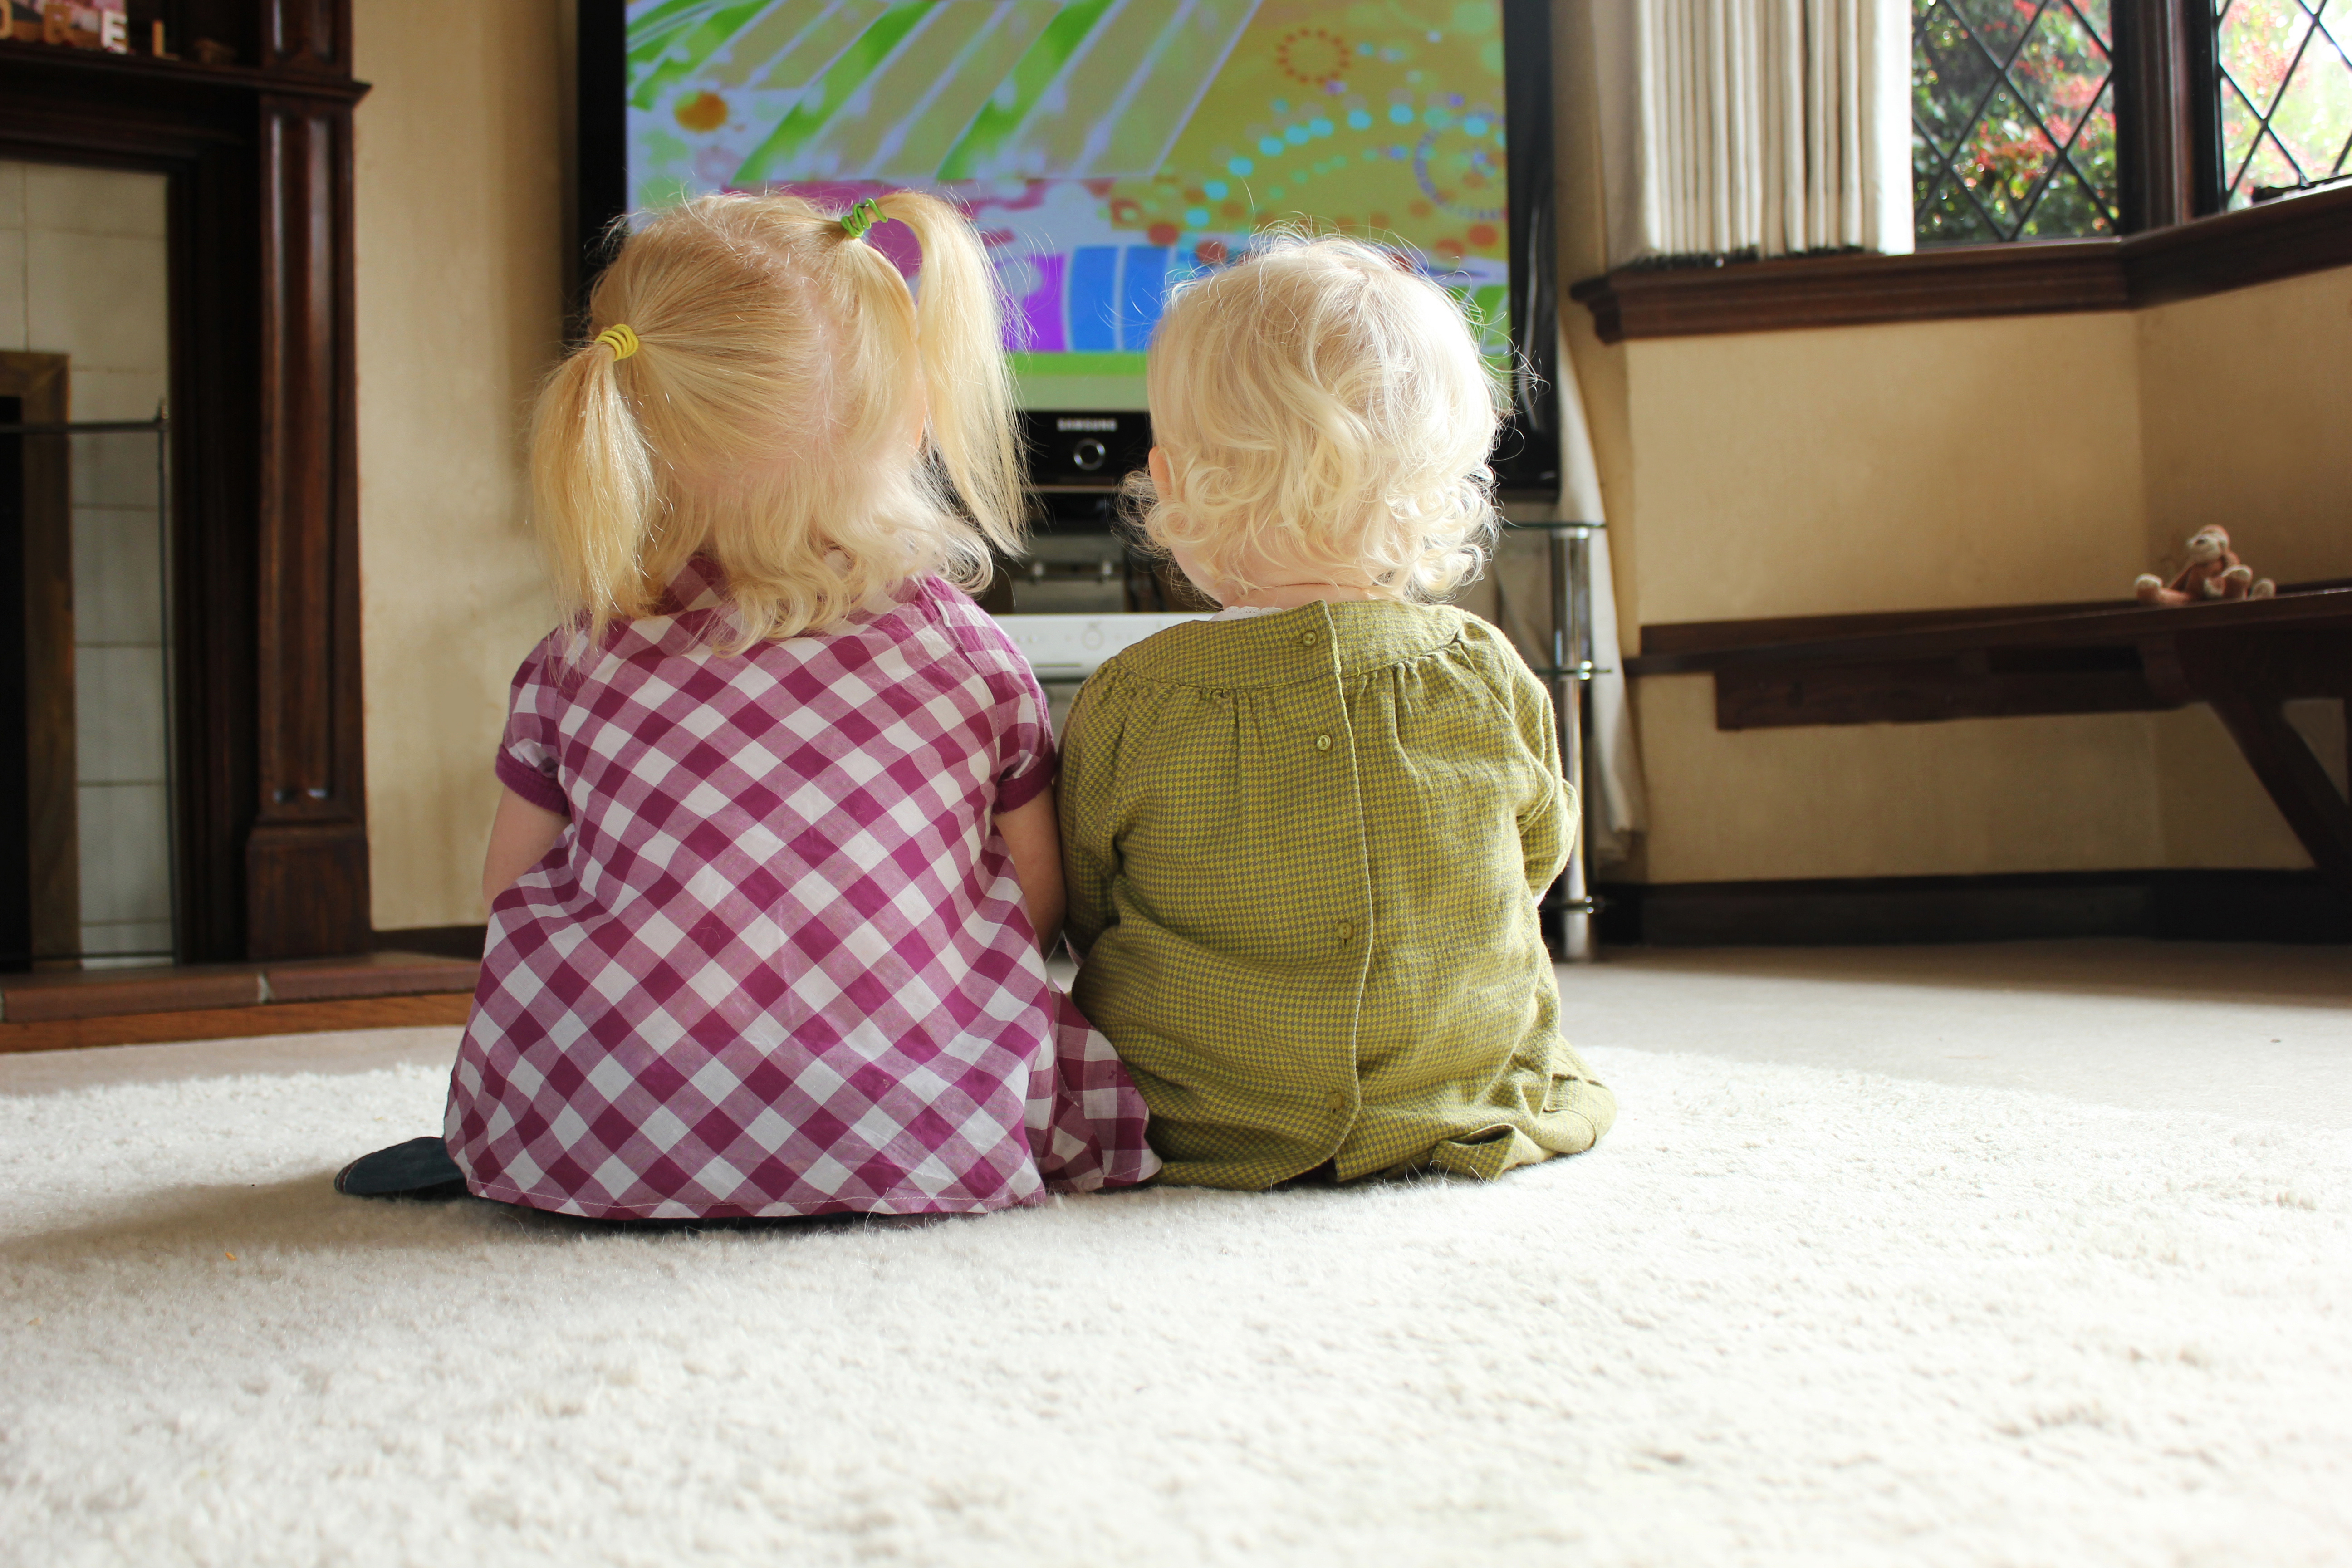 Your Toddler or Preschooler and TV